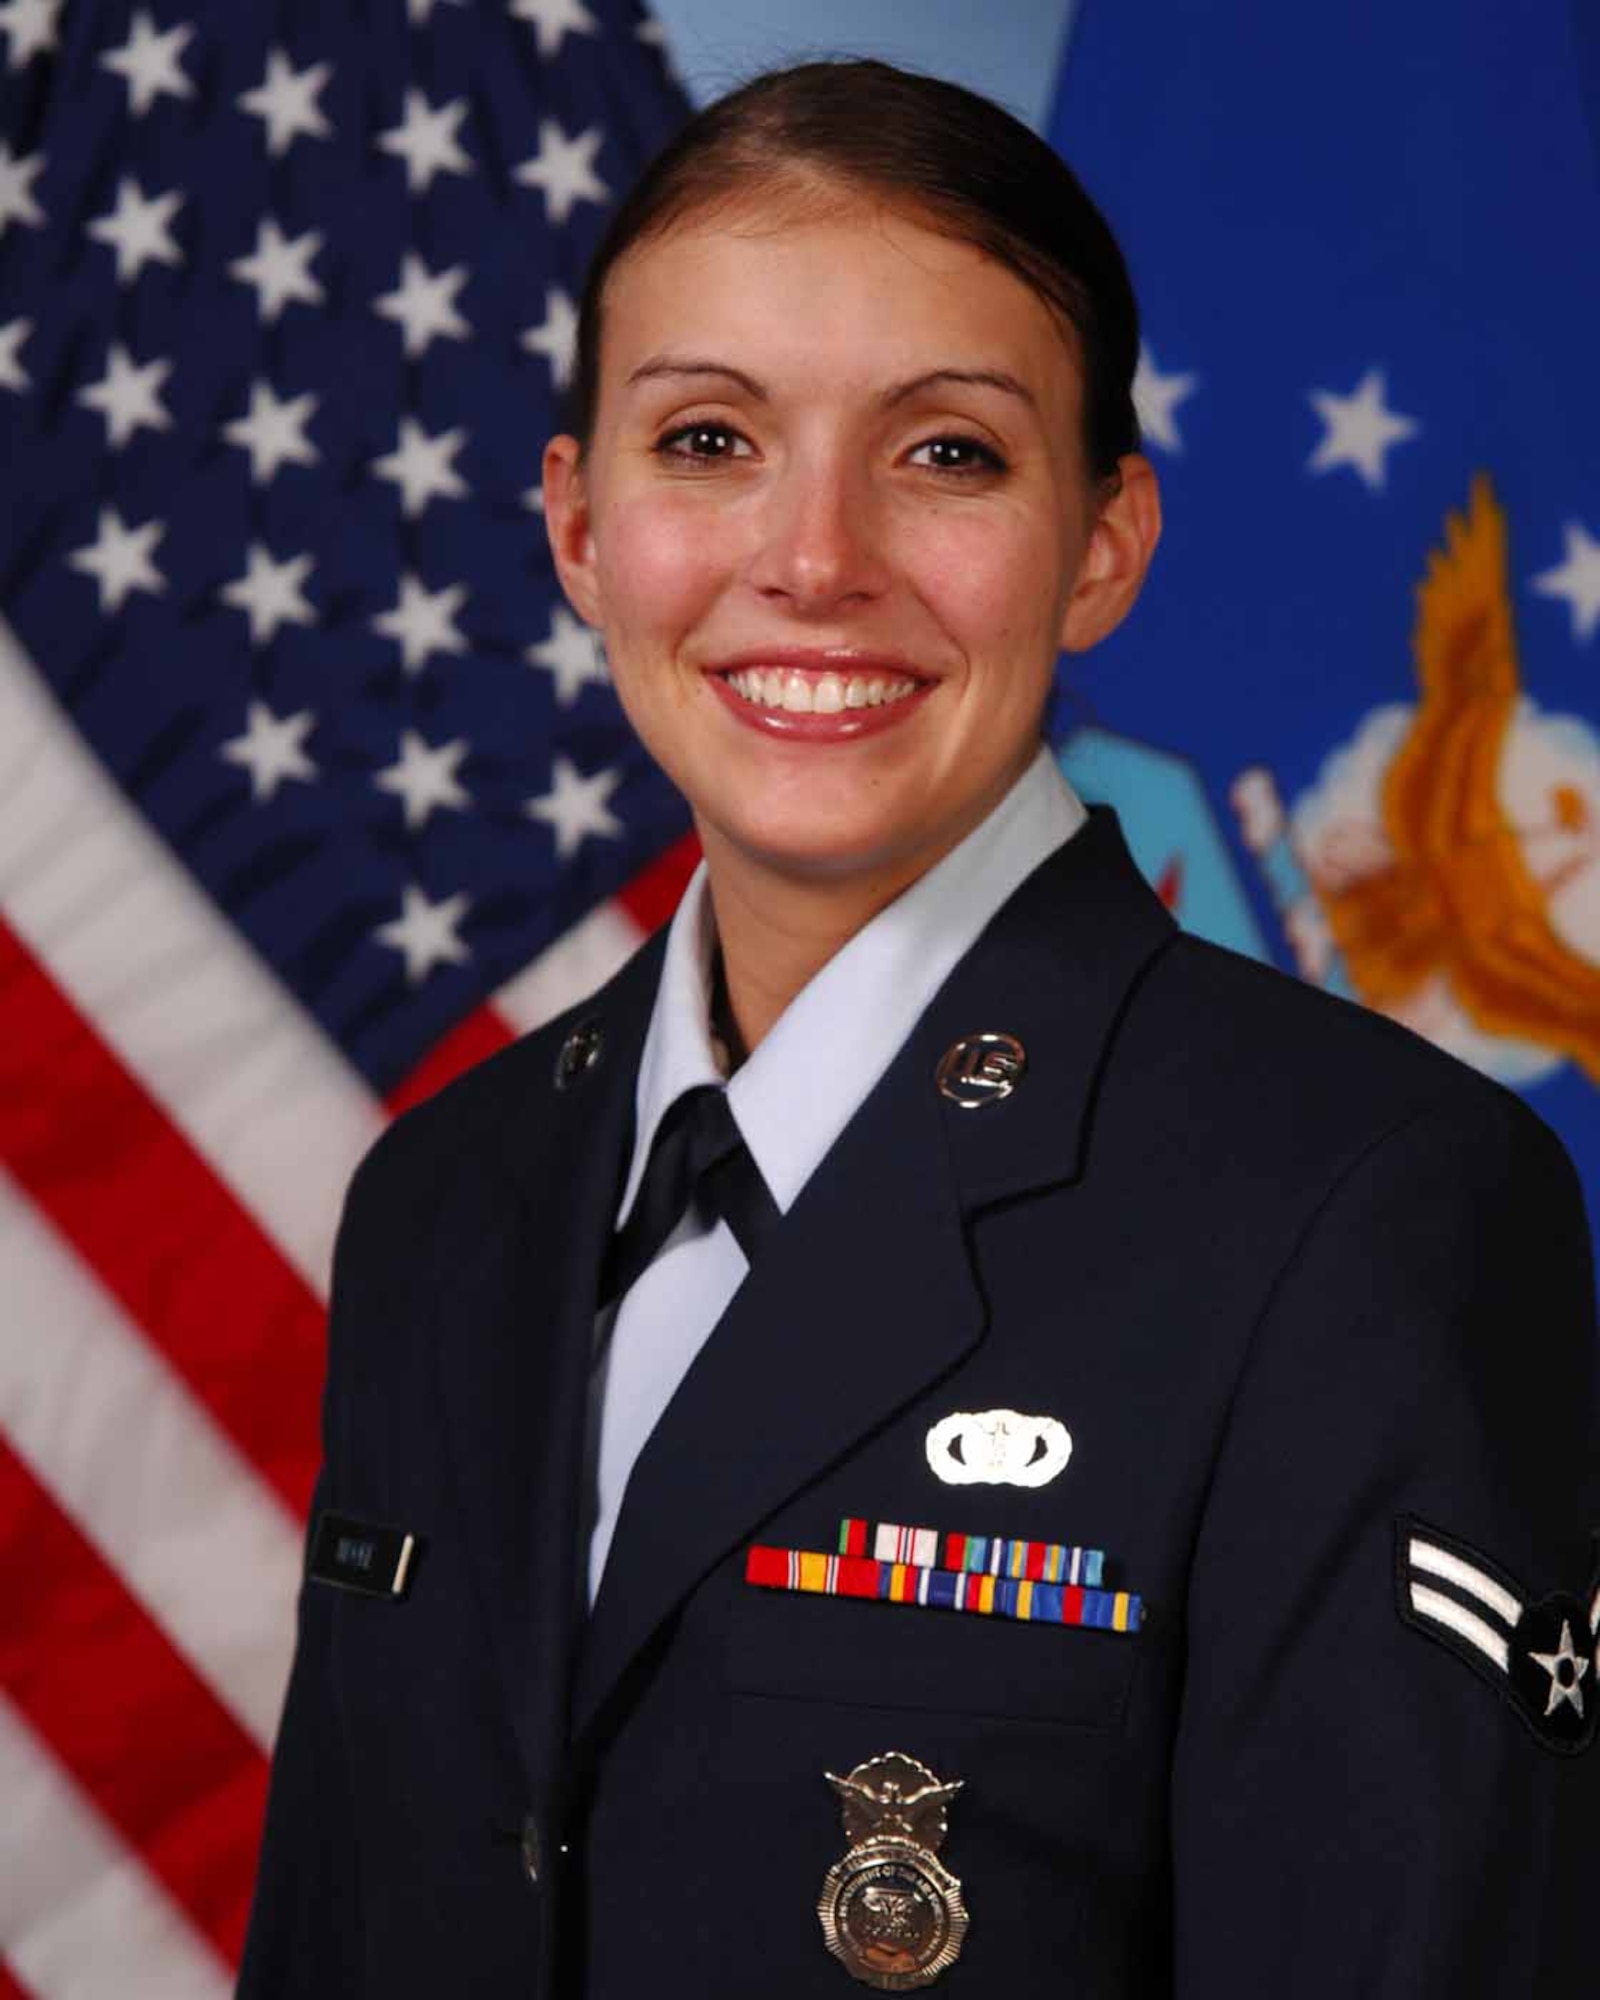 SHAW AIR FORCE BASE, S.C. -- The 20th Fighter Wing announced its annual award winners during a ceremony Feb. 9. Airman 1st Class Crystal Moore, 20th Security Forces Squadron, won the 20th Fighter Wing Airman of the Year award. 